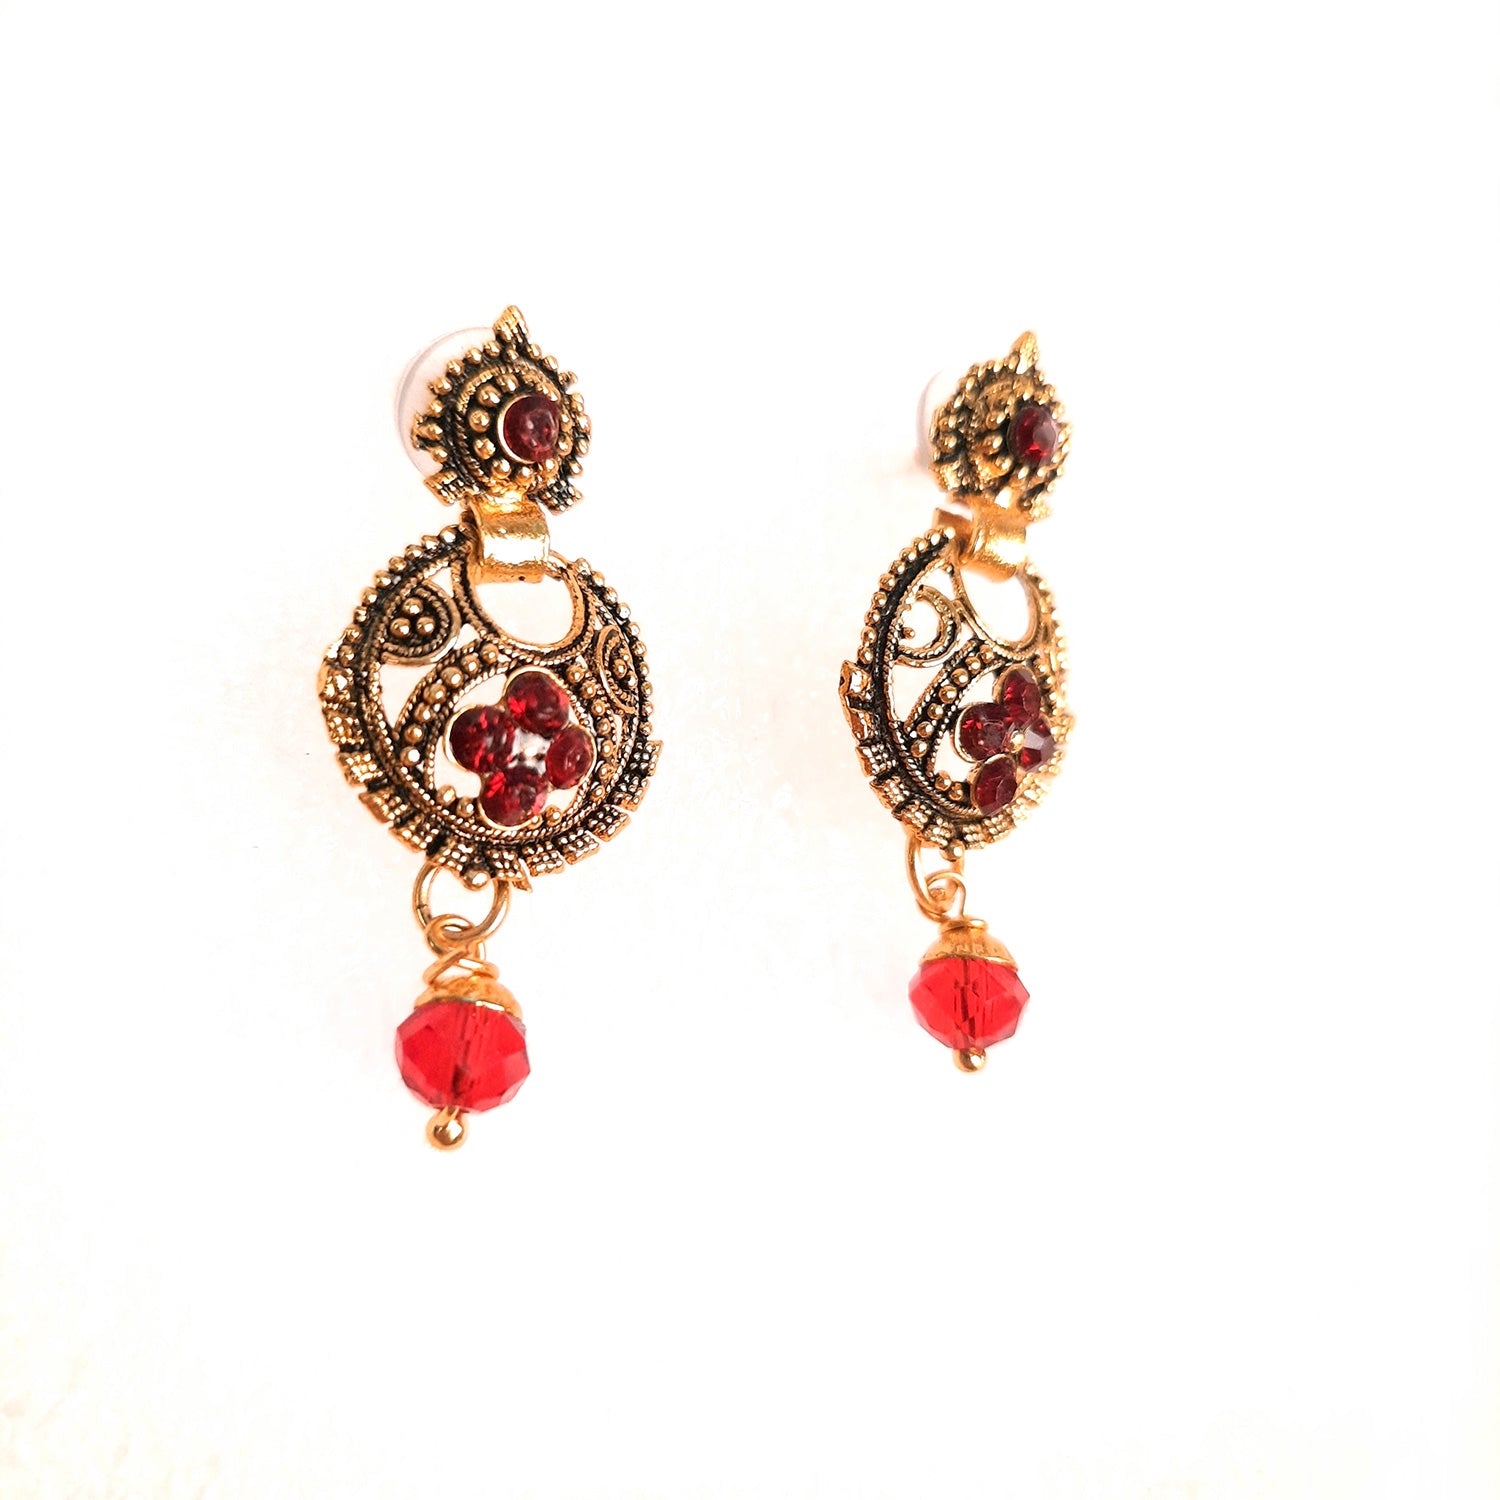 Earrings Jhumka - for Girls and Women | Latest Stylish Fashion Jewellery | Gifts for Her, Friendship Day, Valentine's Day Gift - Apkamart